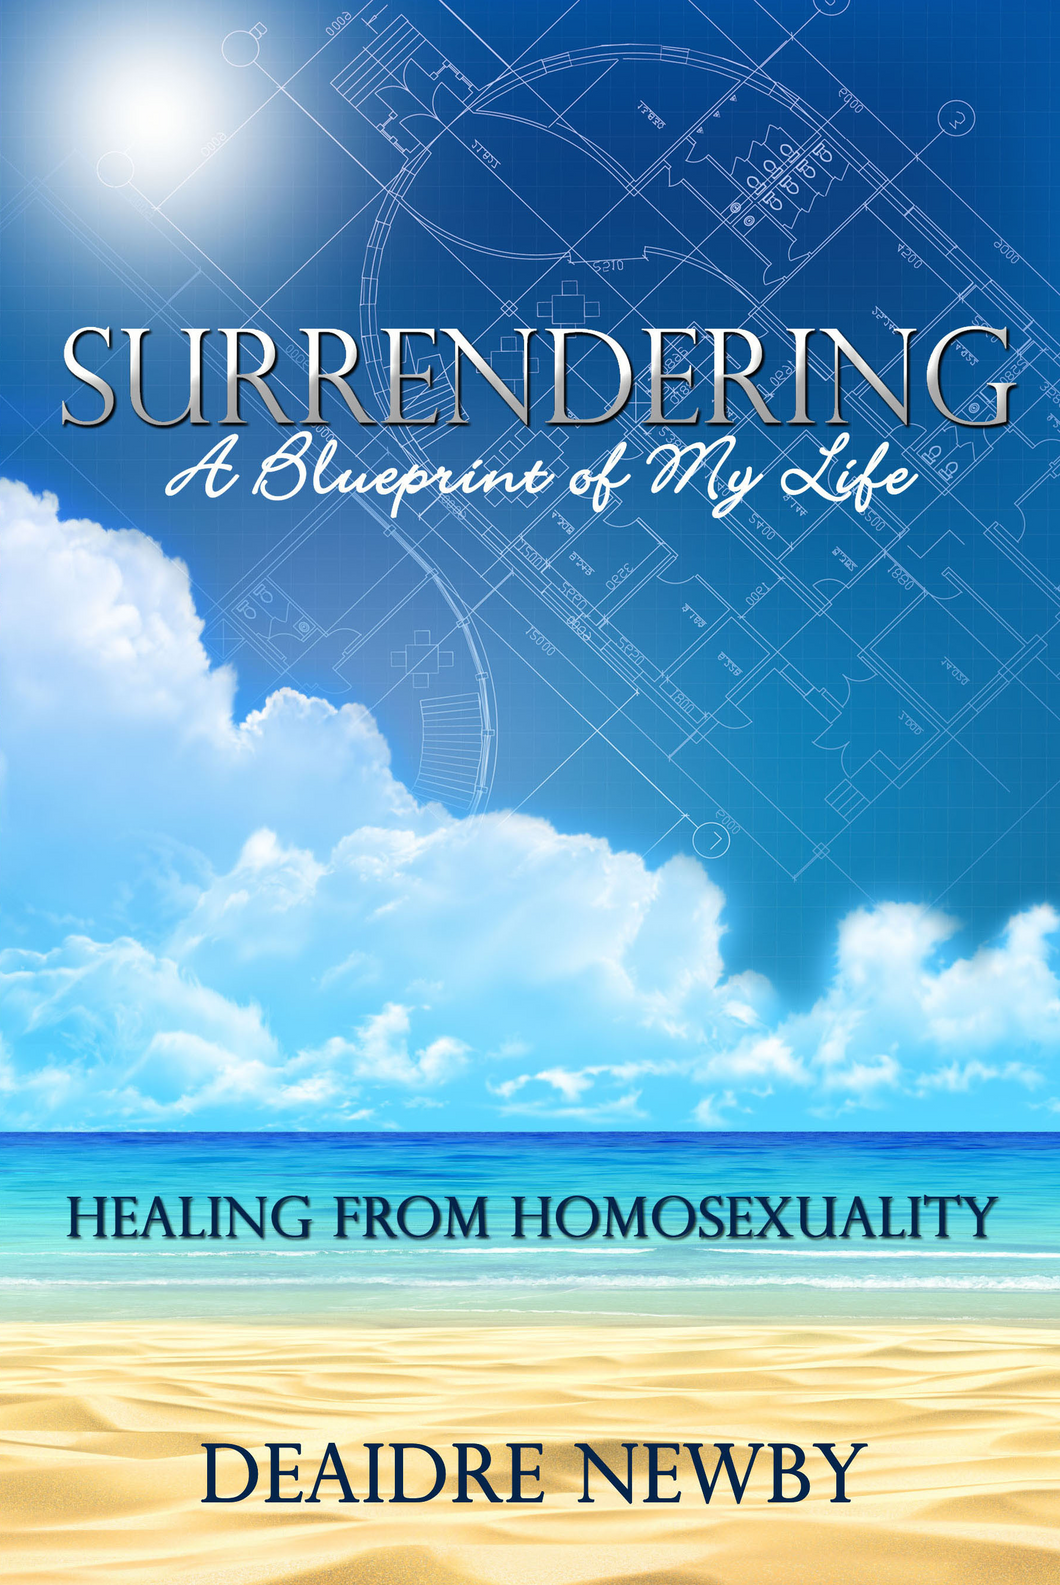 Surrendering: A Blueprint of My Life - First Edition